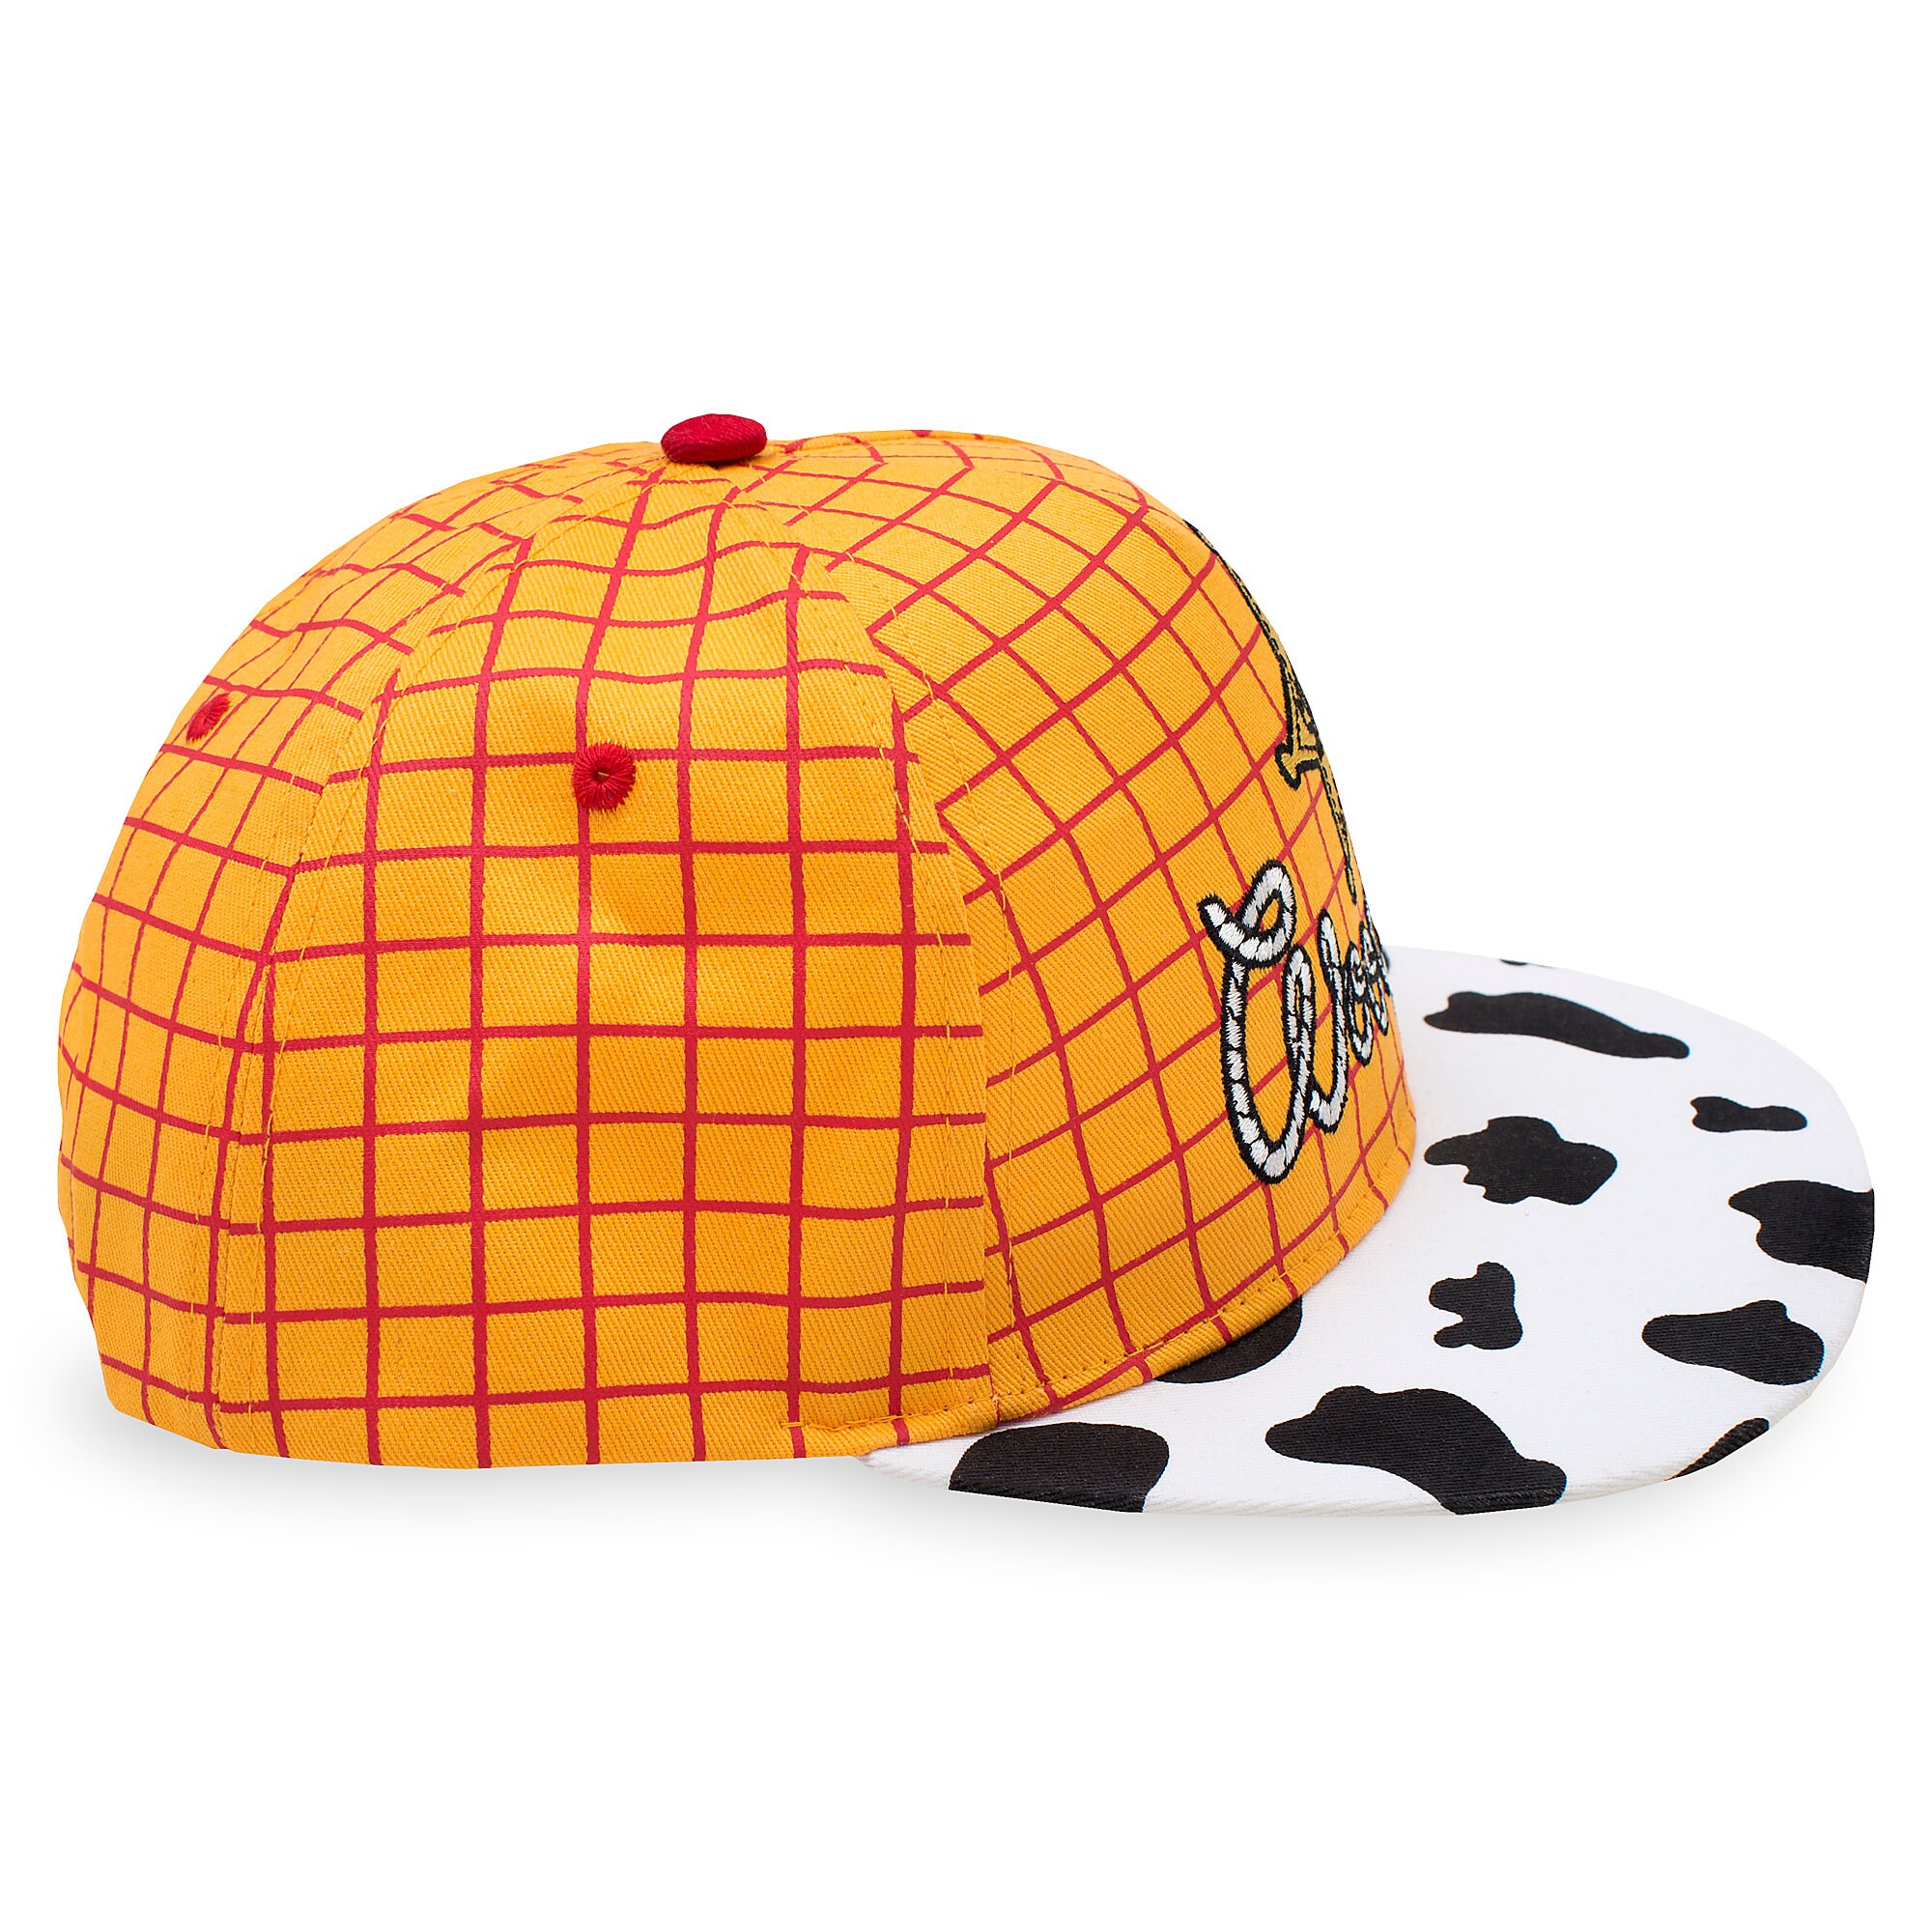 Woody Baseball Cap for Adults by Cakeworthy - Toy Story 4